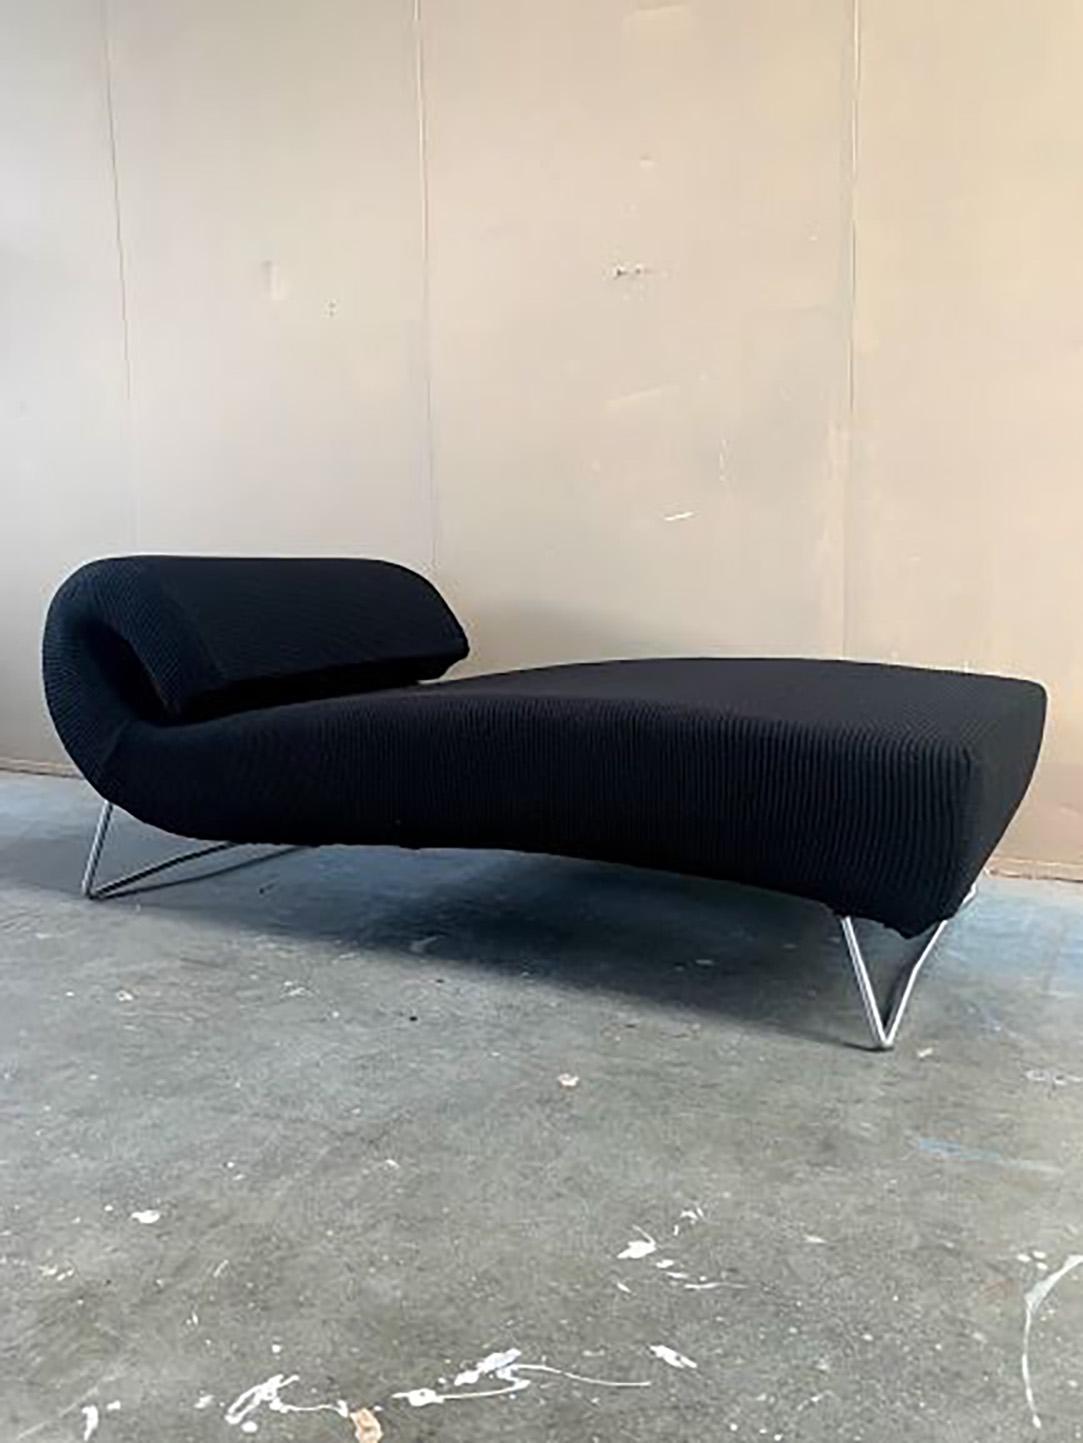 French Pascal Mourgue, Ligne Roset, Sofa, Daybed 2004